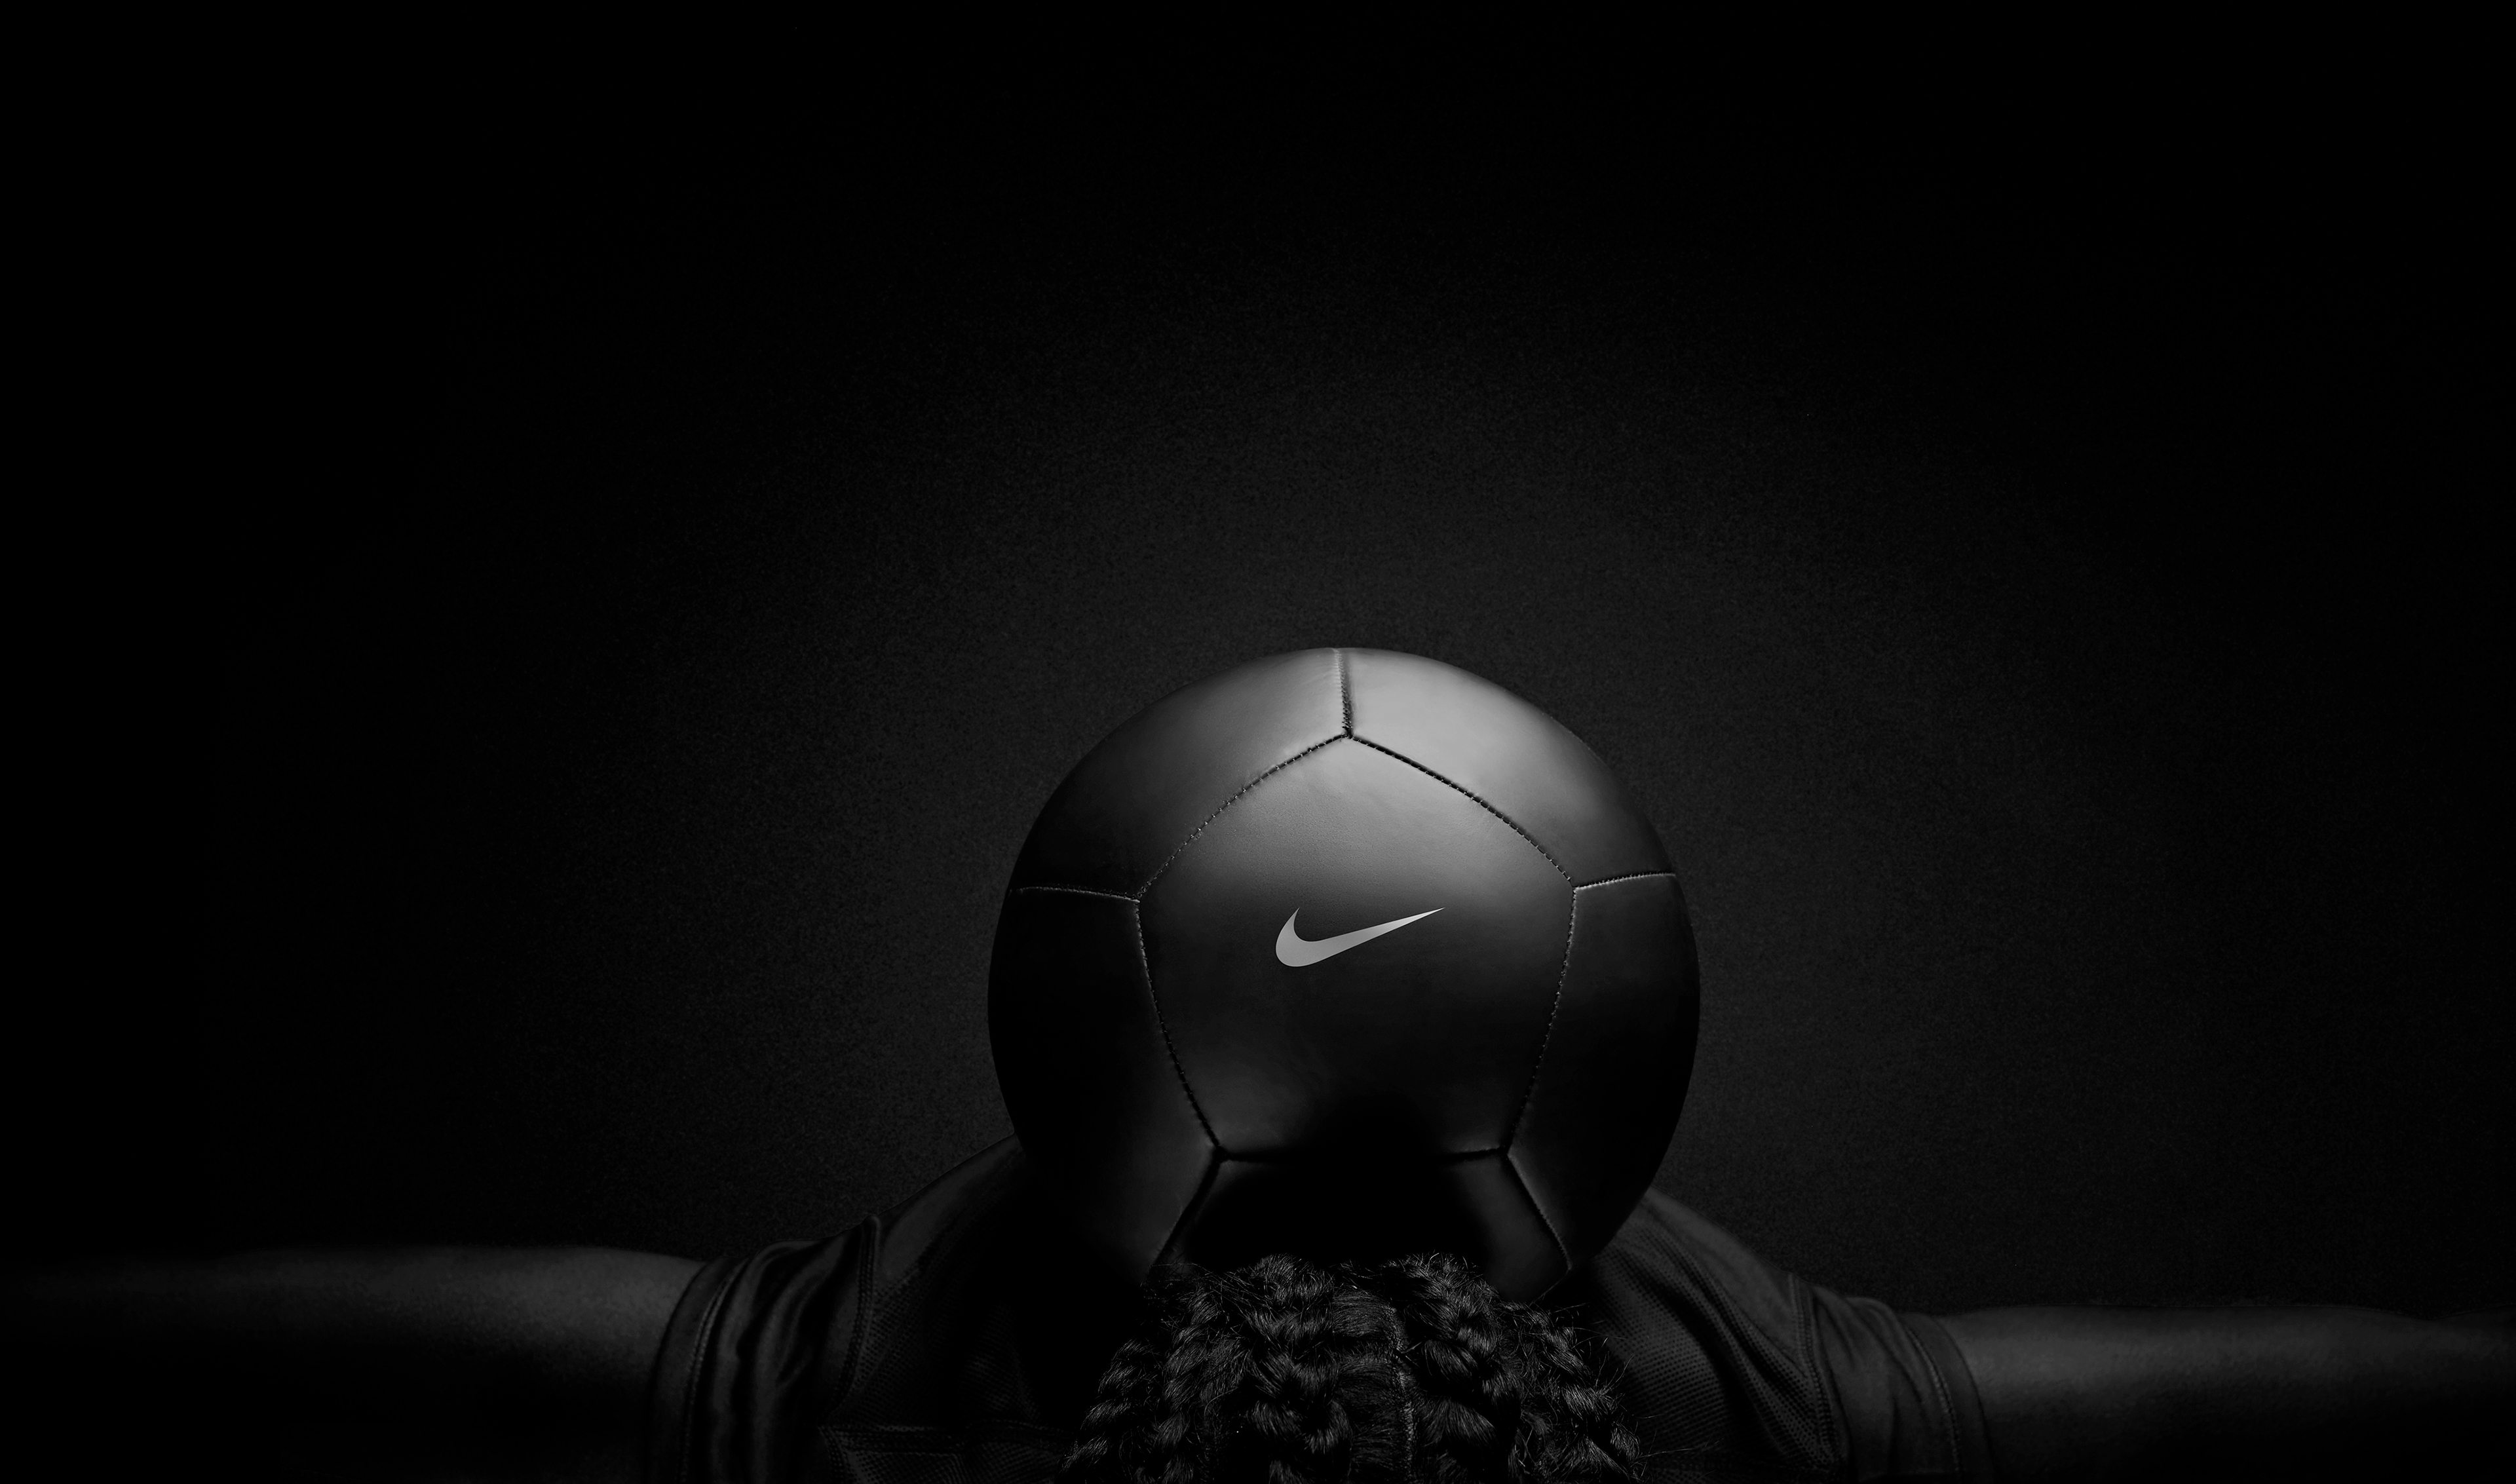 Nike Black Play Football, HD Sports, 4k Wallpapers, Images, Backgrounds